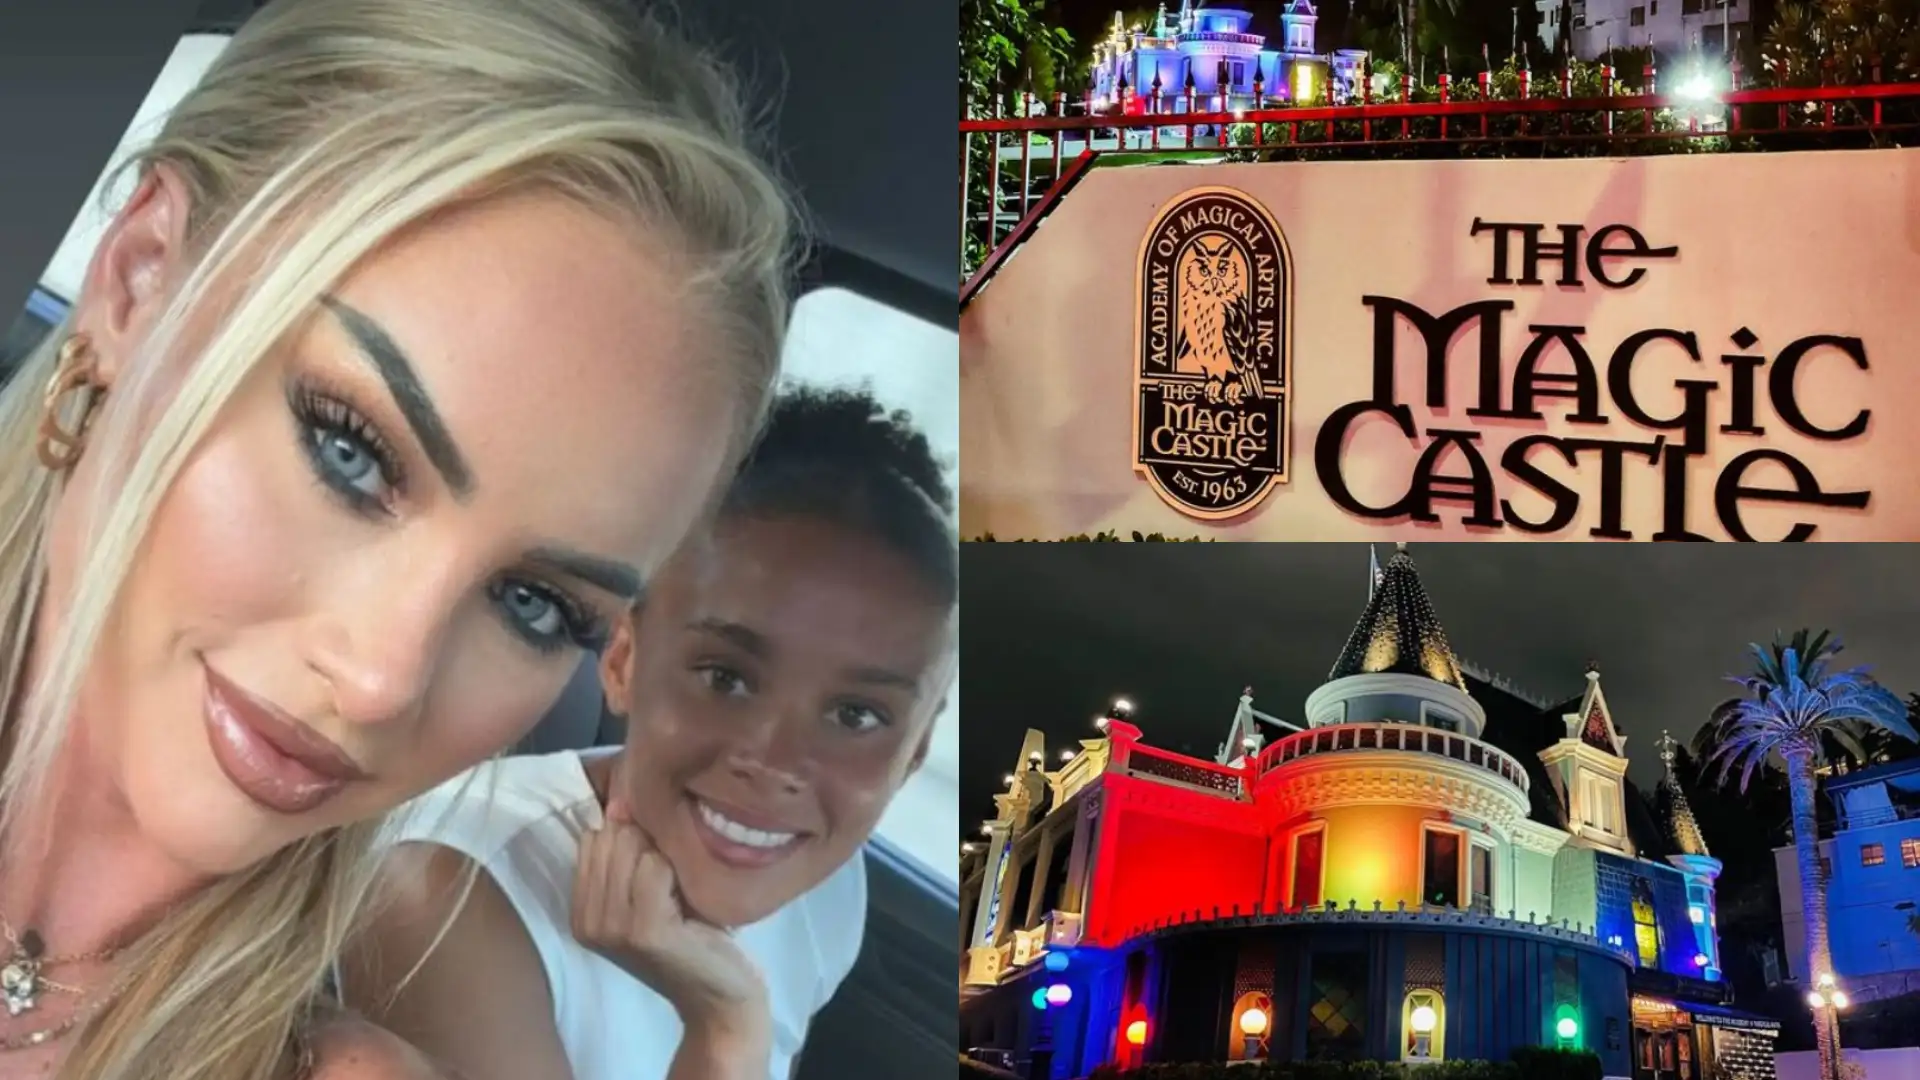 Alisha Lehmann heads for night out at LA's exclusive Magic Castle after day on the beach as she continues pre-Copa America tour